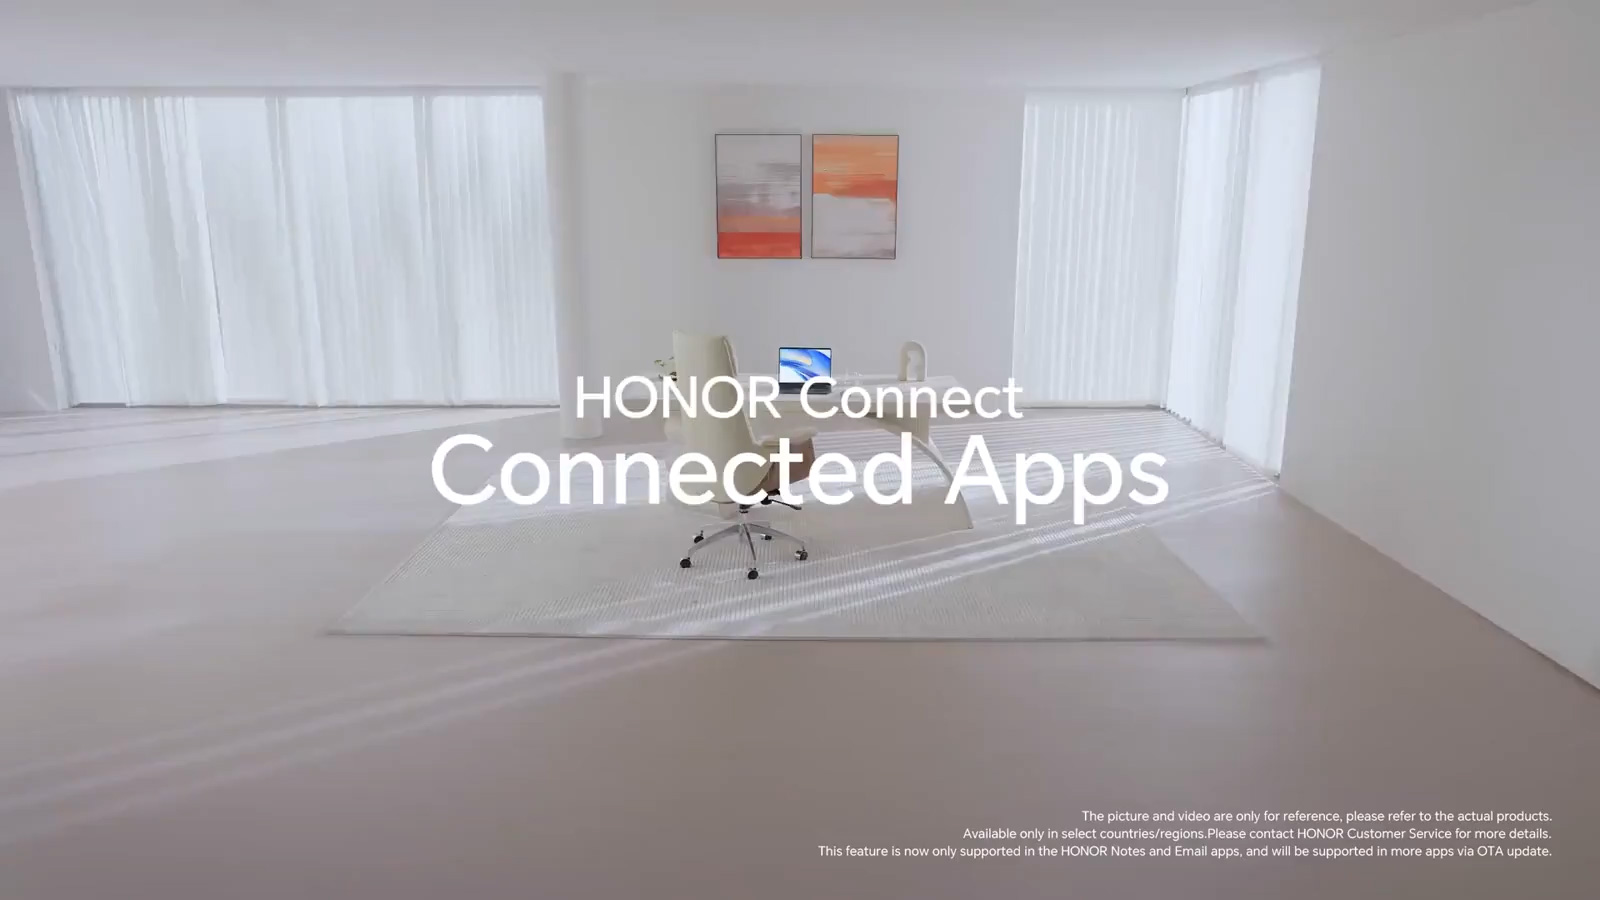 HONOR Connect connects without boundary